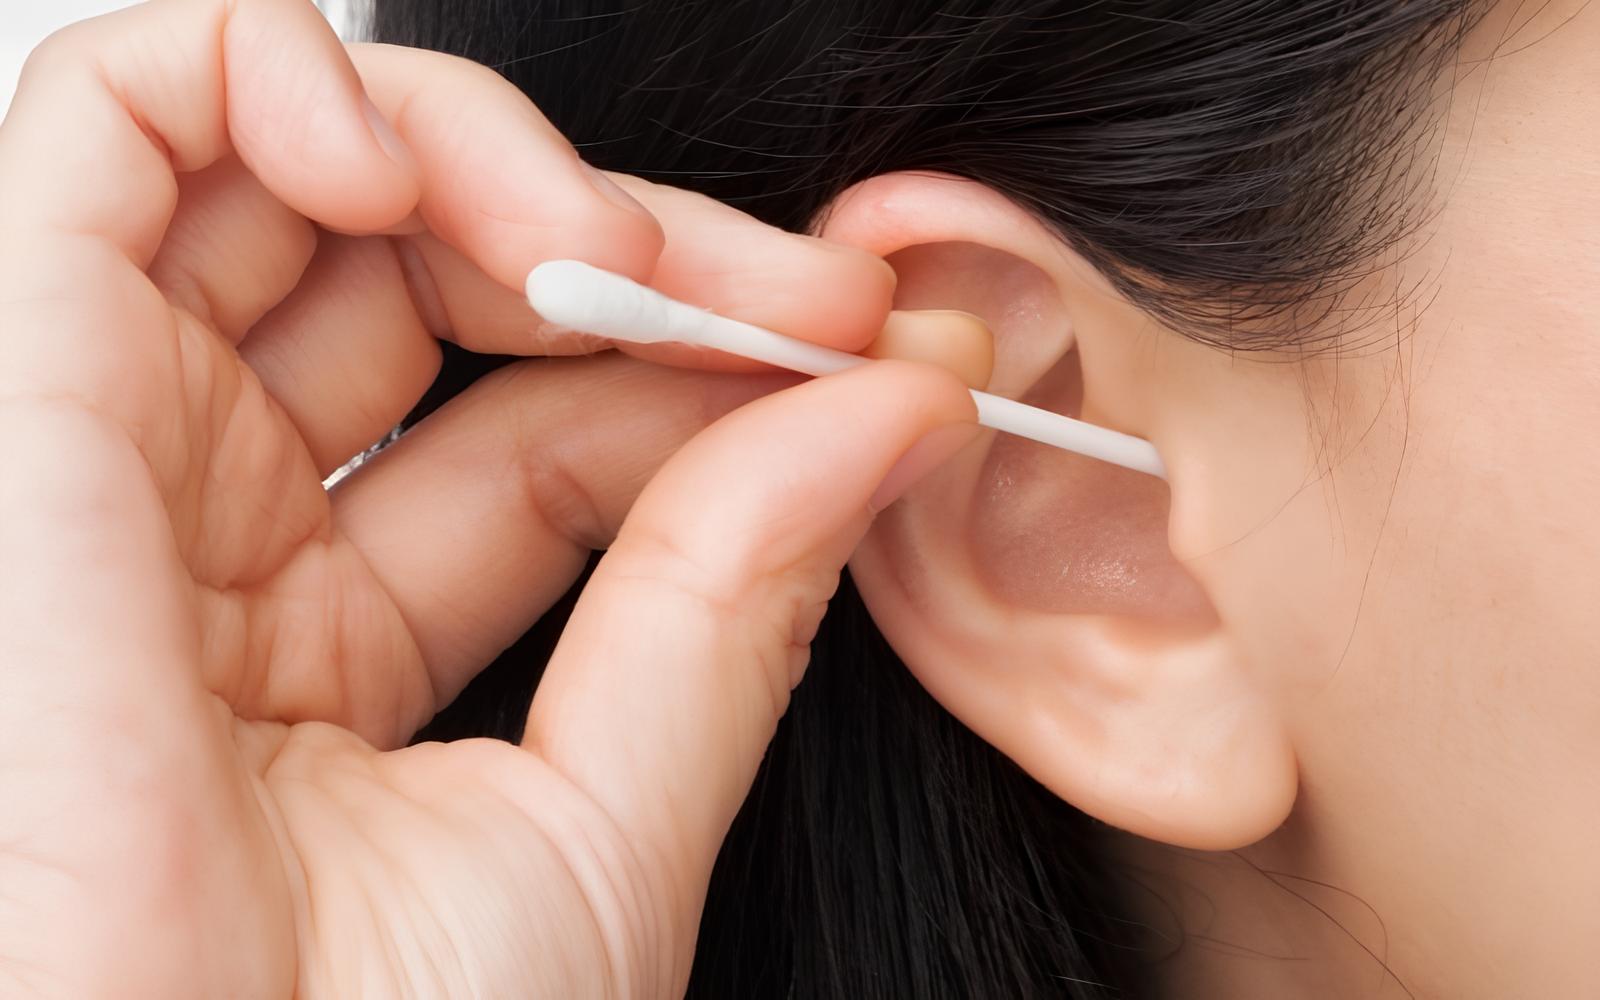 Some Additional Tips to Get Rid of Ear Blackheads Quickly